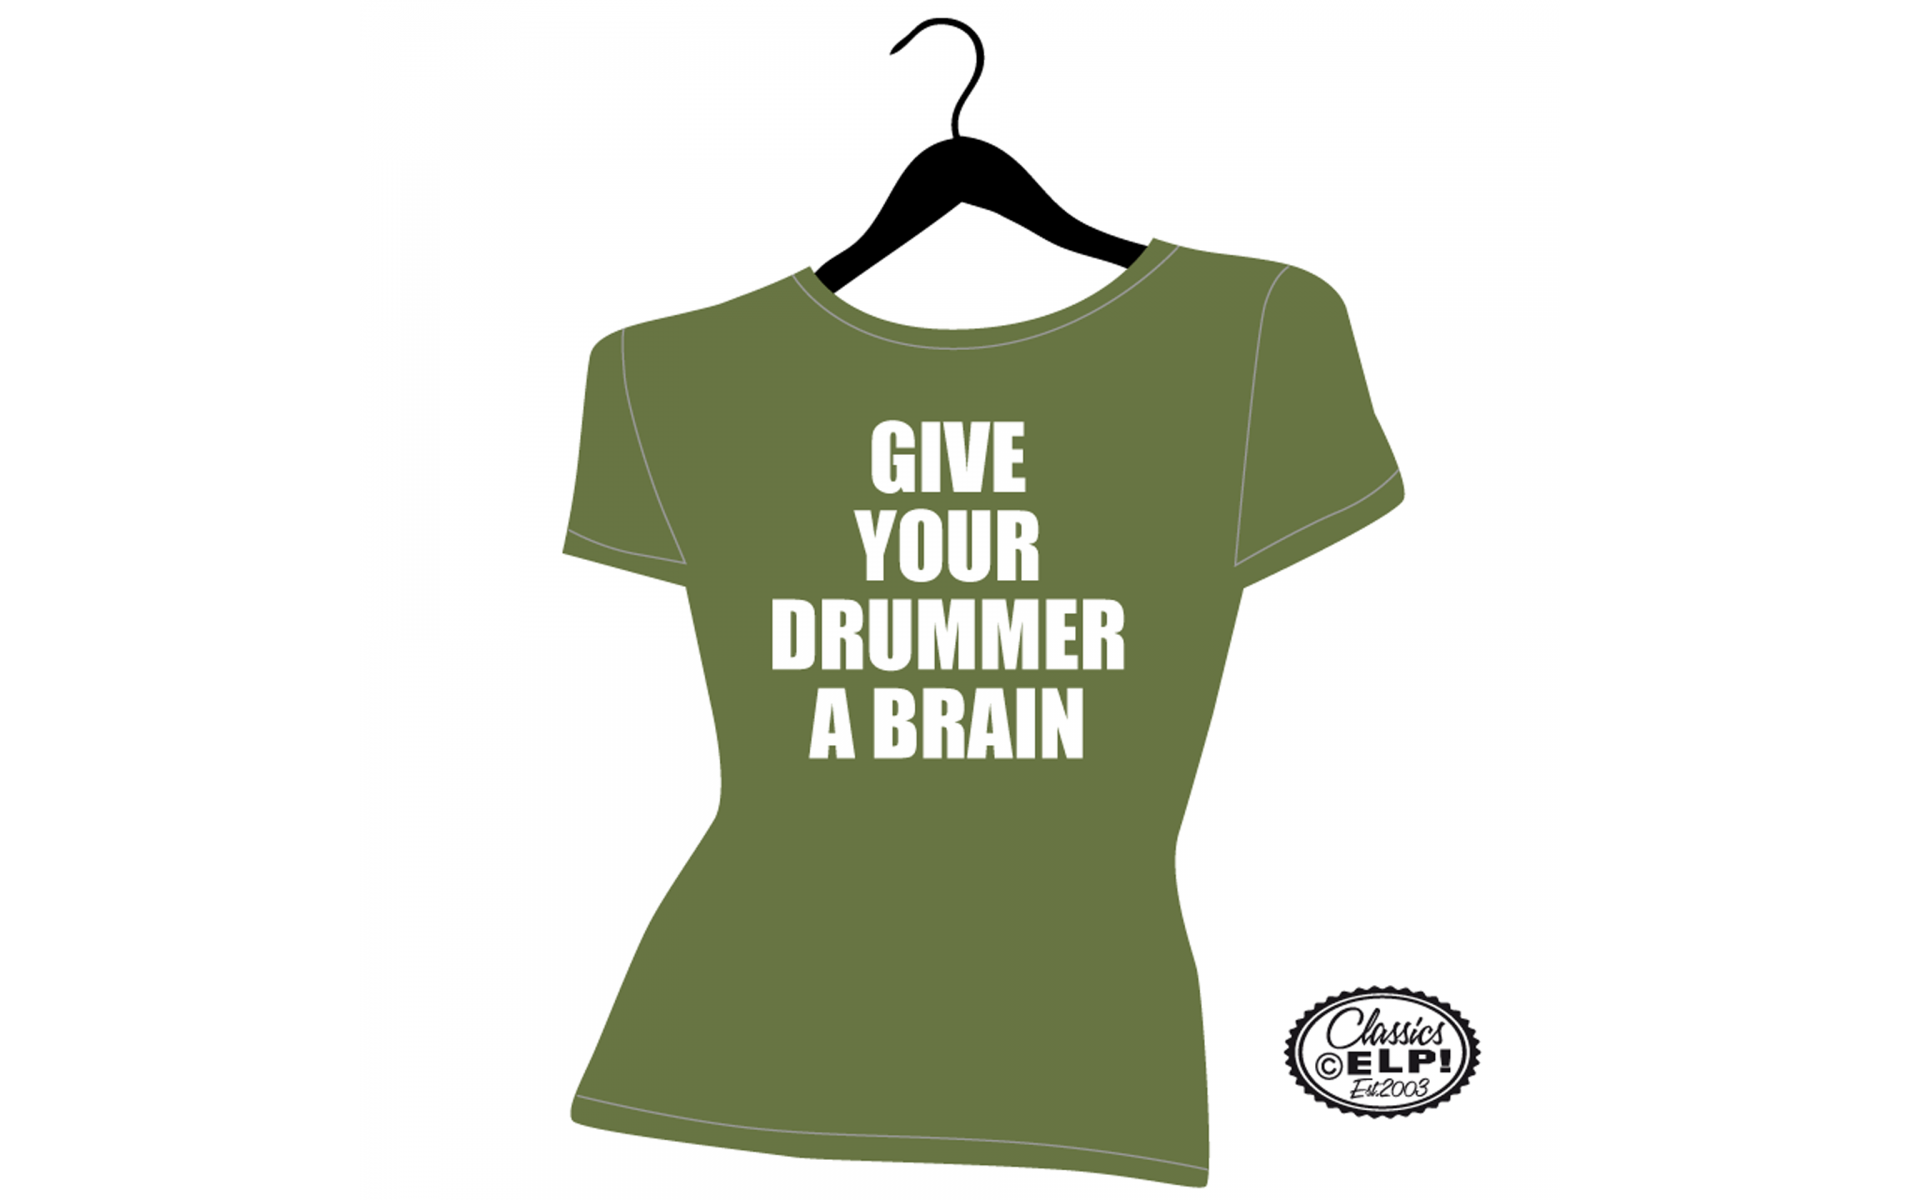 Give your drummer a brain